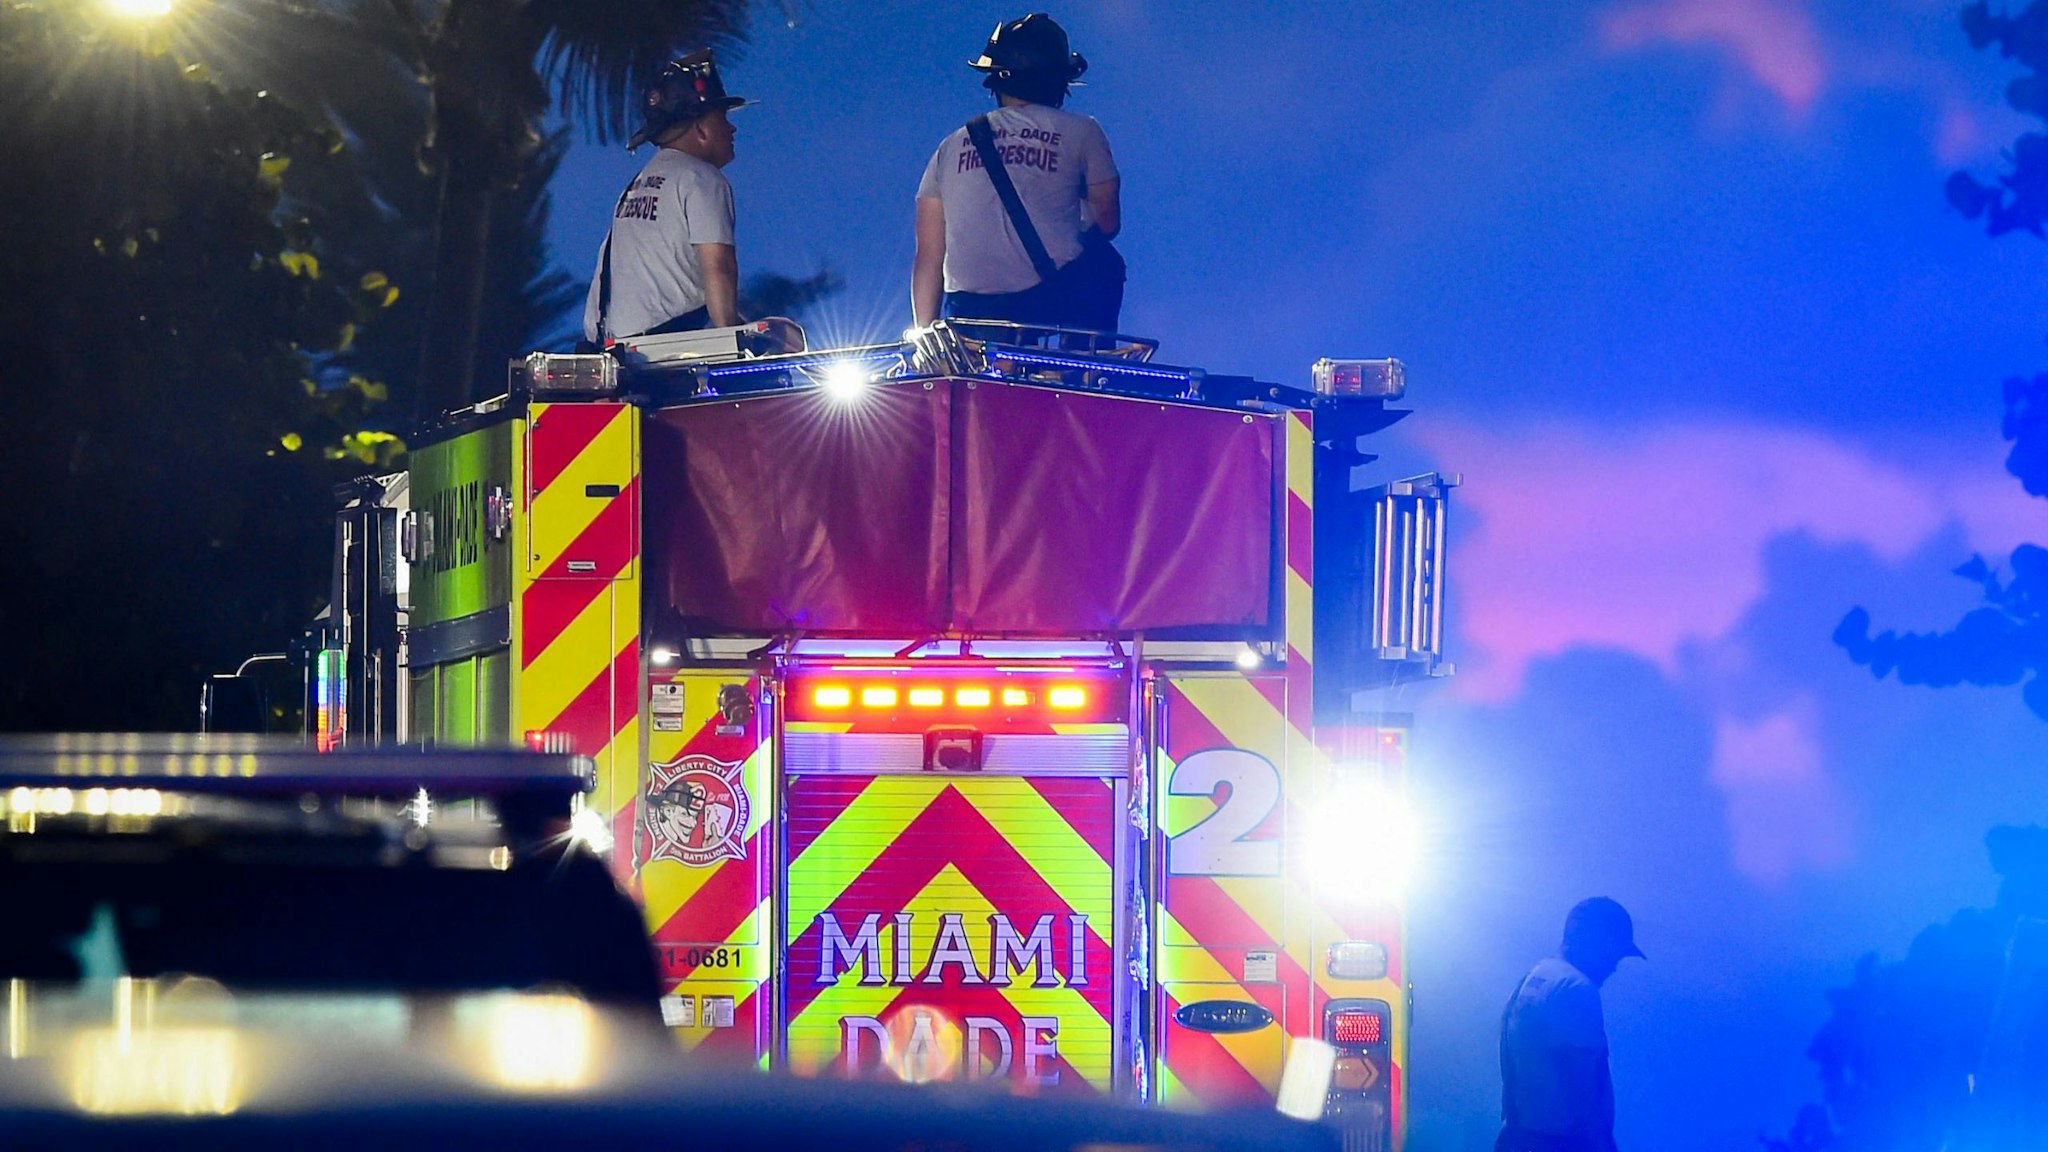 A Miami-Dade firefighter works during a rescue operation of a partially collapsed building in Surfside north of Miami Beach, Florida on June 25, 2021. - Four people are now known to have died in the collapse of an oceanfront apartment building near Miami Beach, officials said Friday, while the number of unaccounted for has risen to 159 -- fueling fears of a much higher death toll.